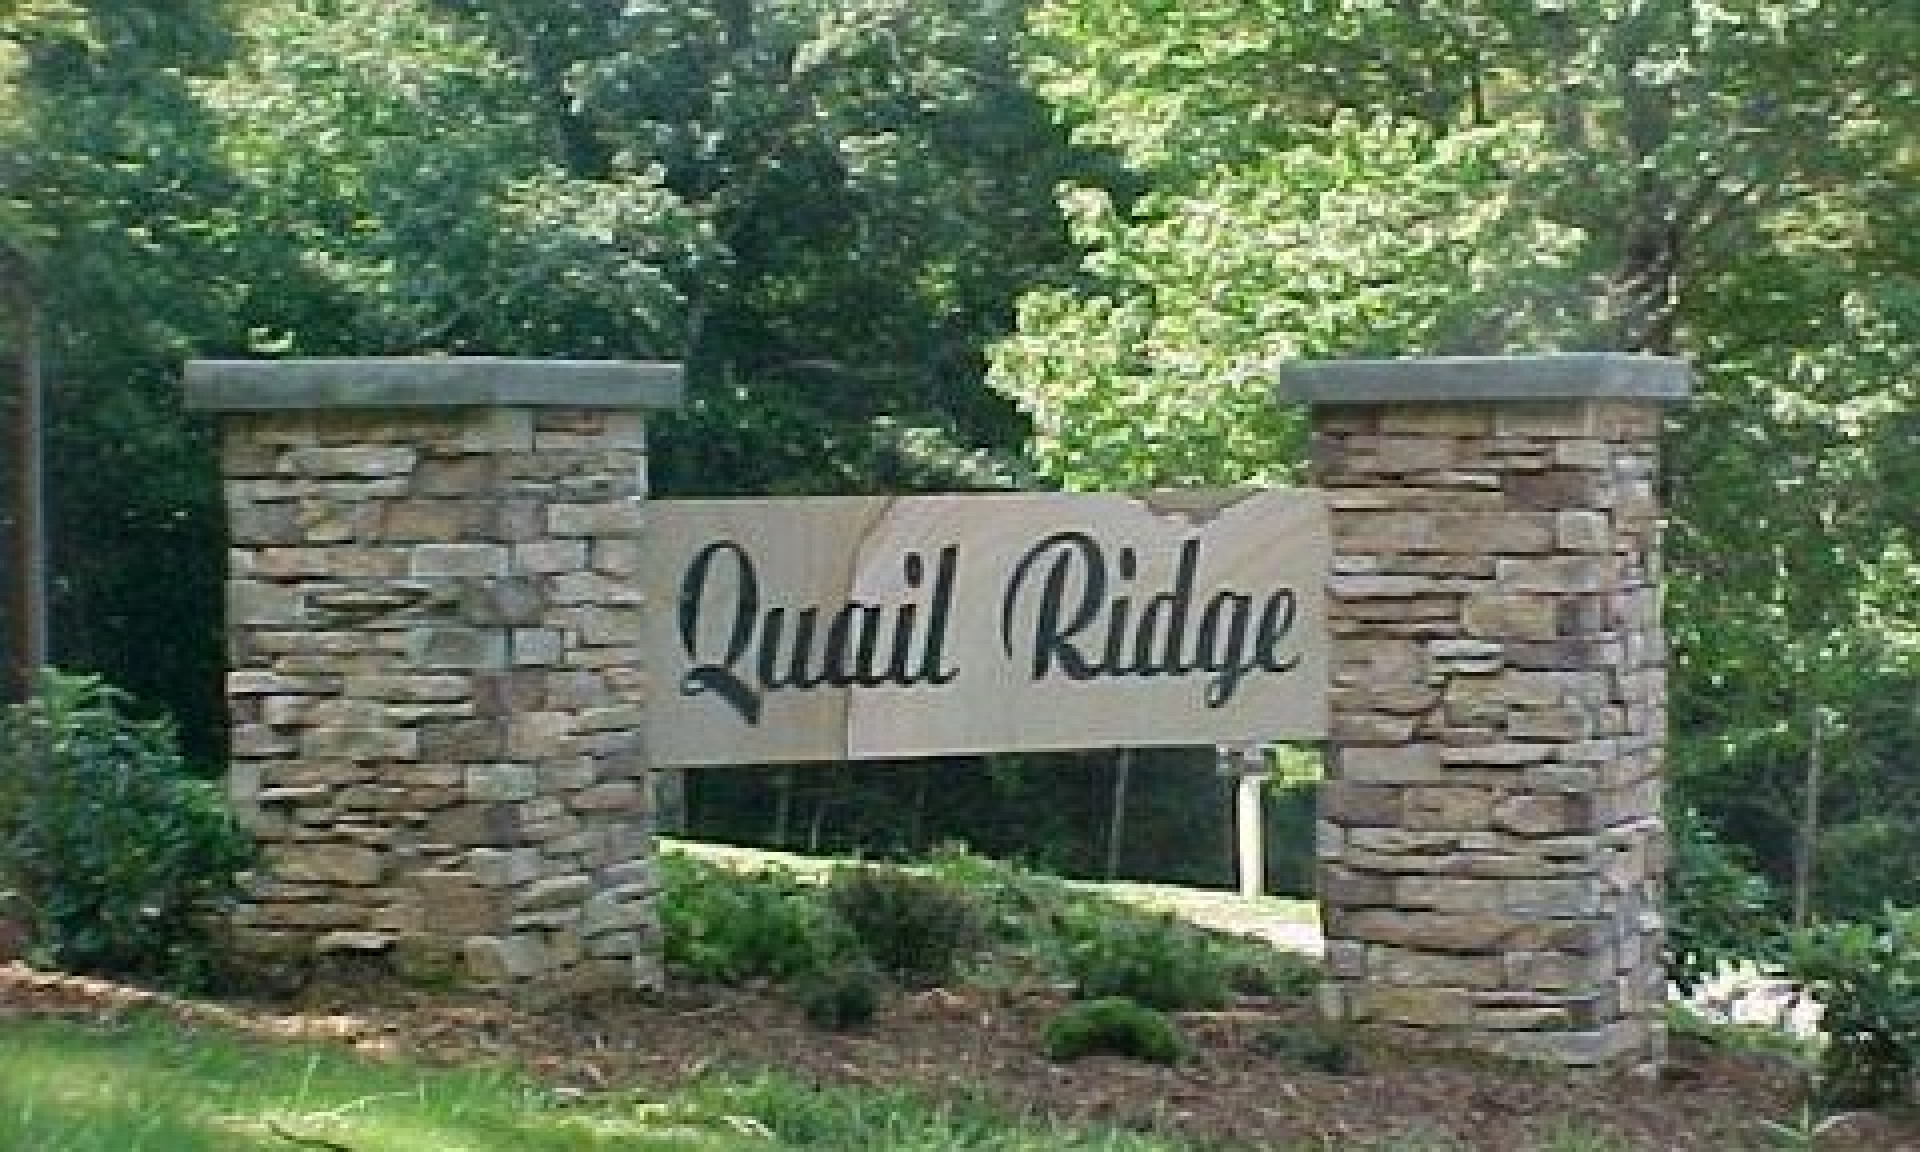 15 Home sites available in Quail Ridge ranging from 0.834 acres to 1.303 acres in size and from $24,000 to $35,000 in price.  The Southern Ashe County location is convenient to shopping in downtown West Jefferson, water recreation on the New River, and just a short drive into Boone and other NC High Country destinations.